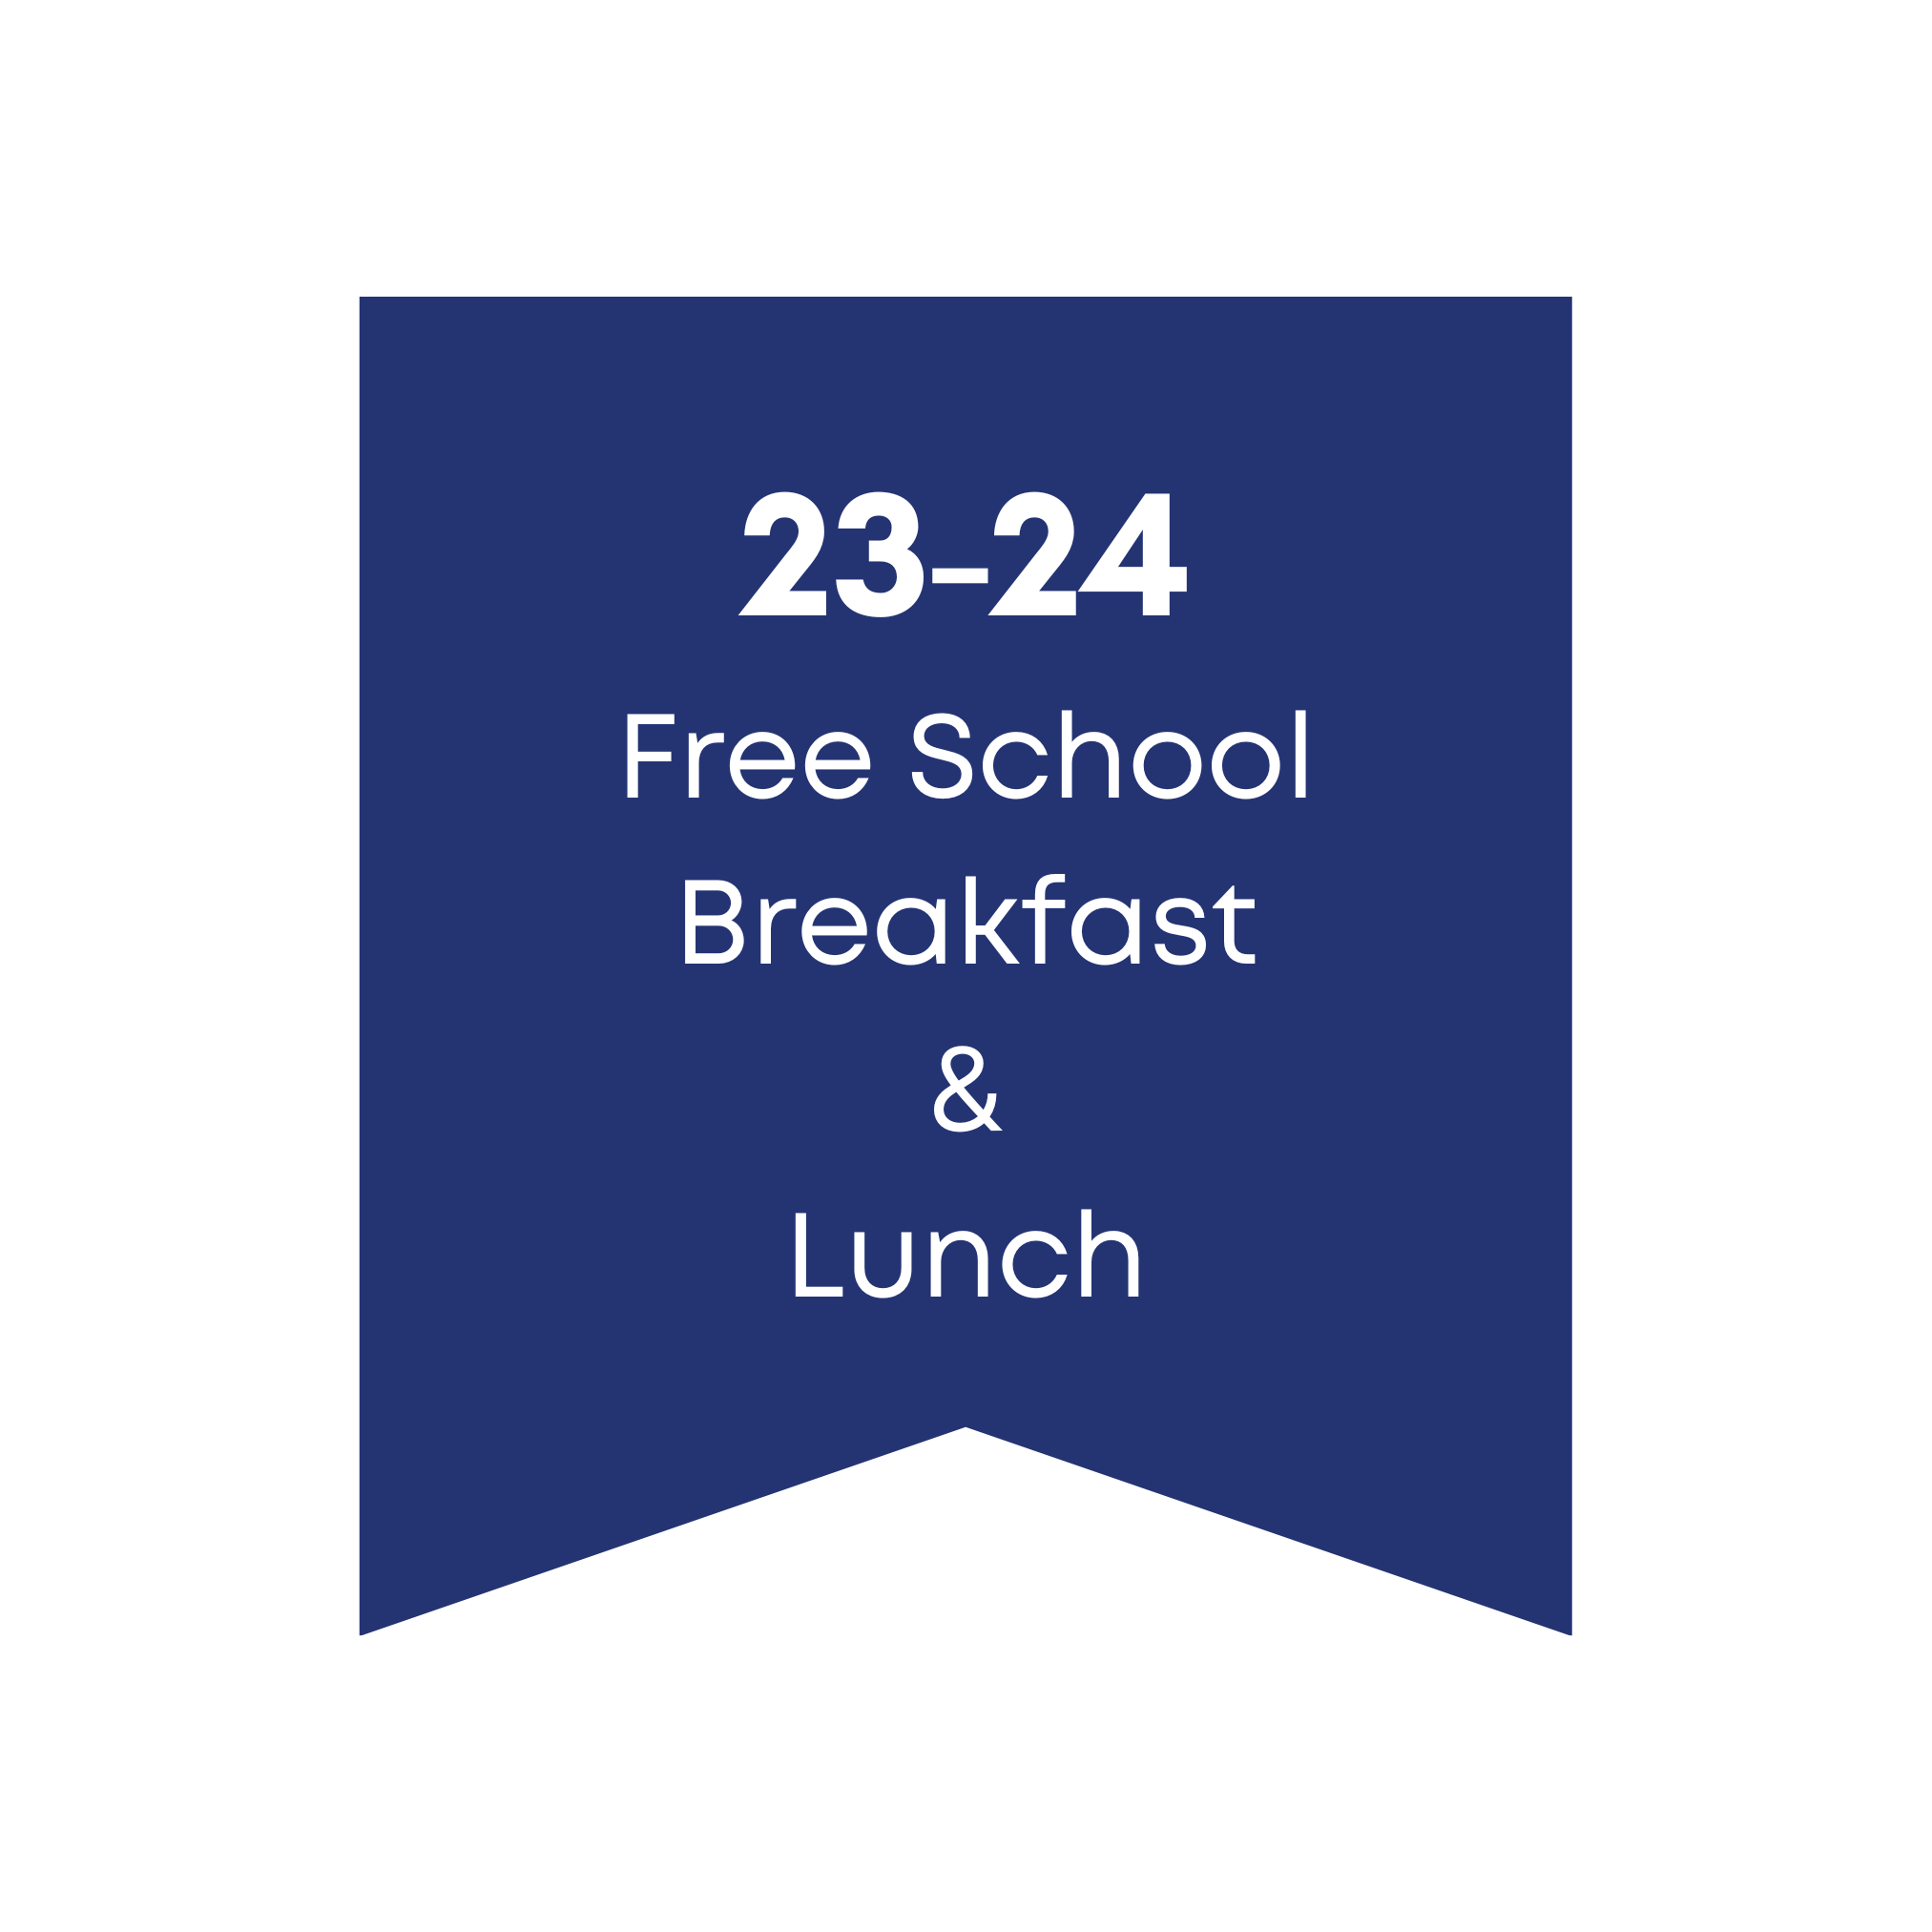 Free school breakfast and lunch 